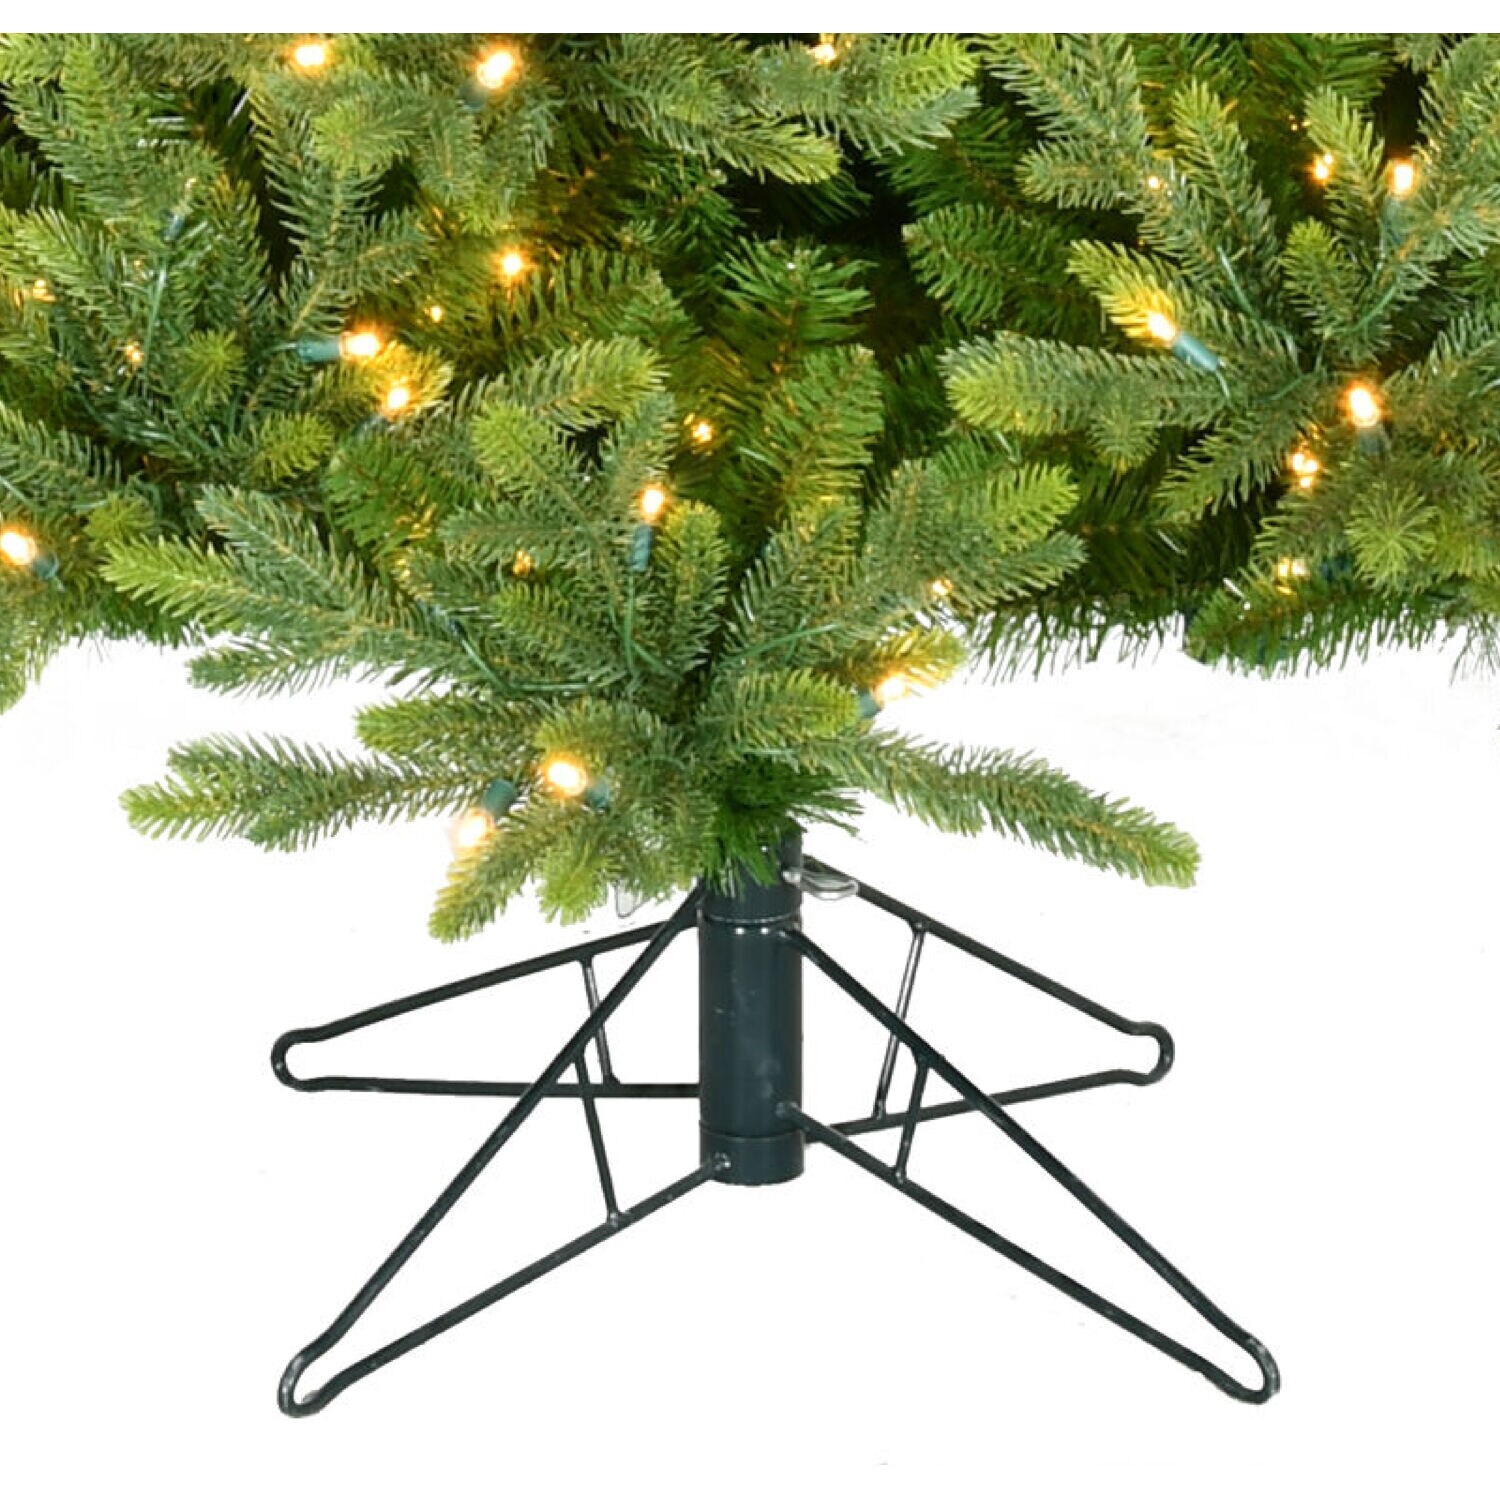 Fraser Hill Farm 8-ft Fir Artificial Christmas Tree with LED Lights in ...